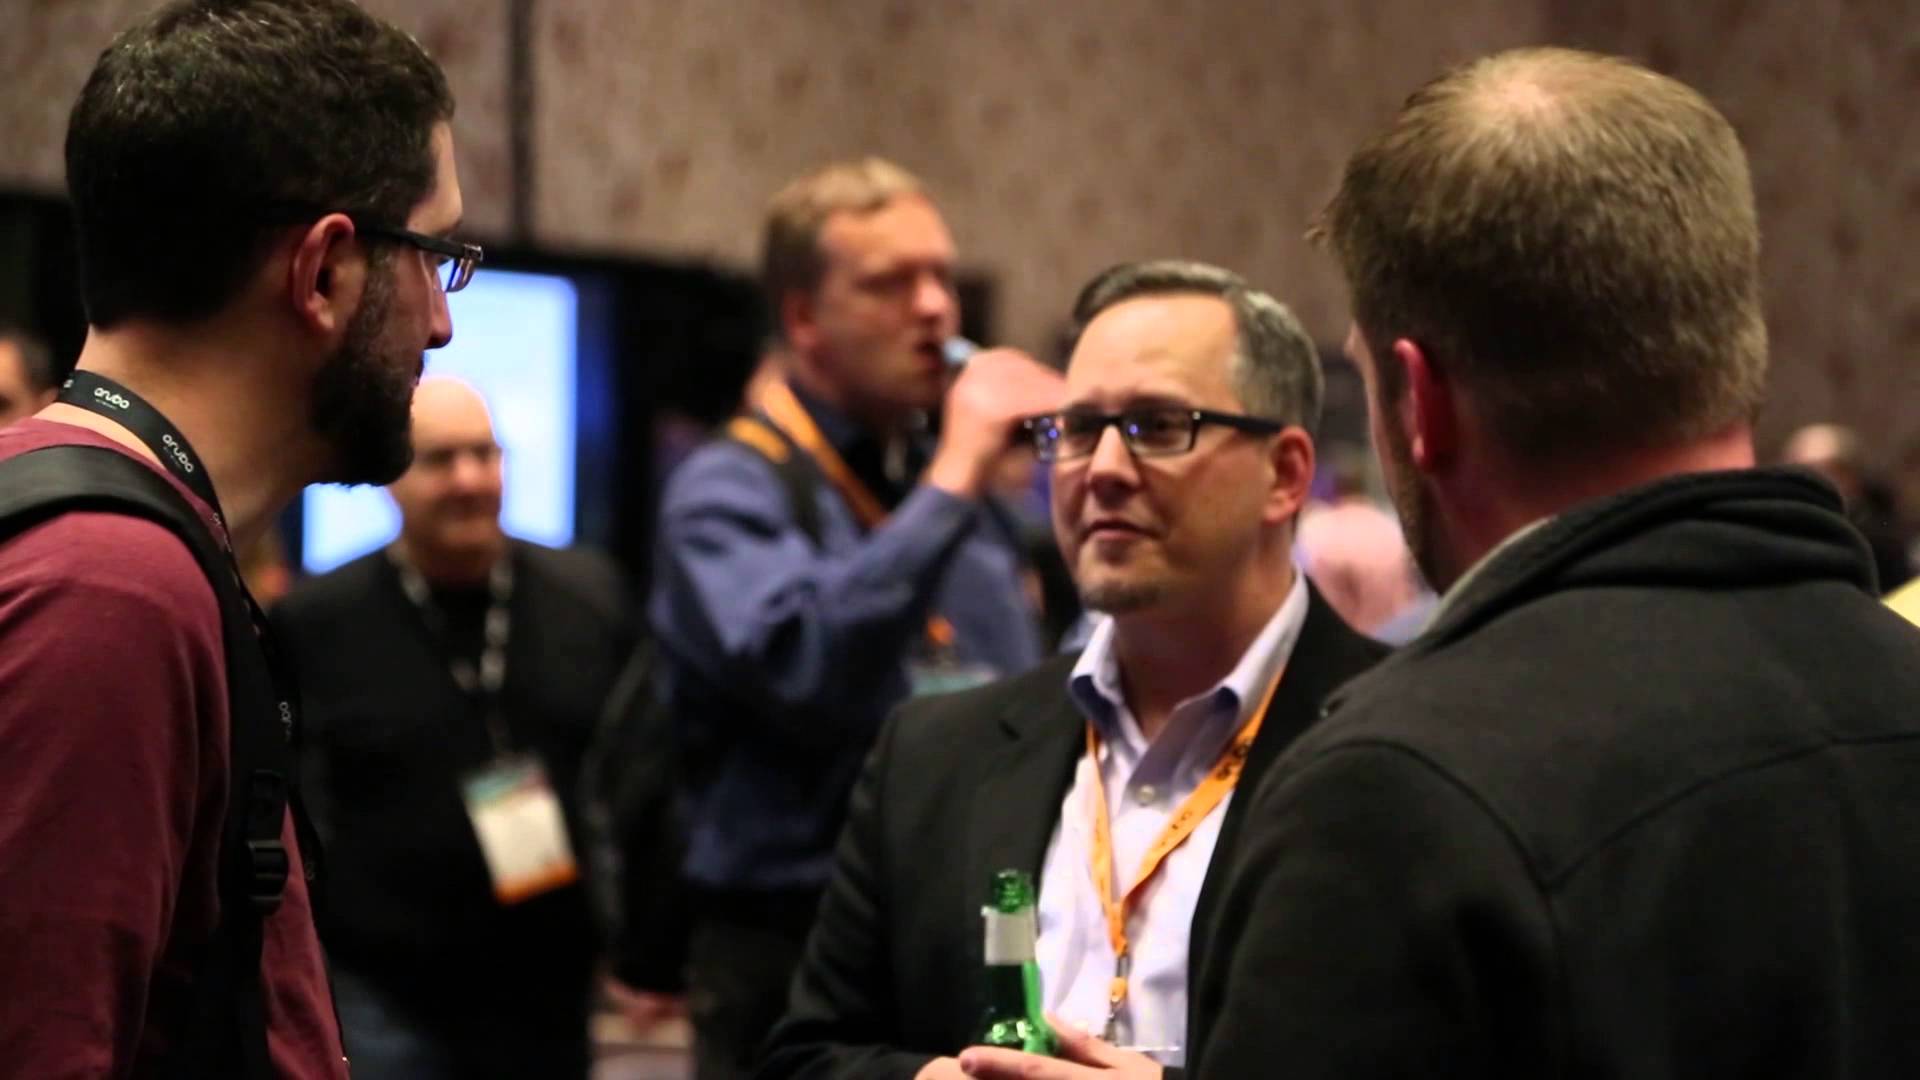 Partner Summit Atmosphere 2015: Sights and Sounds